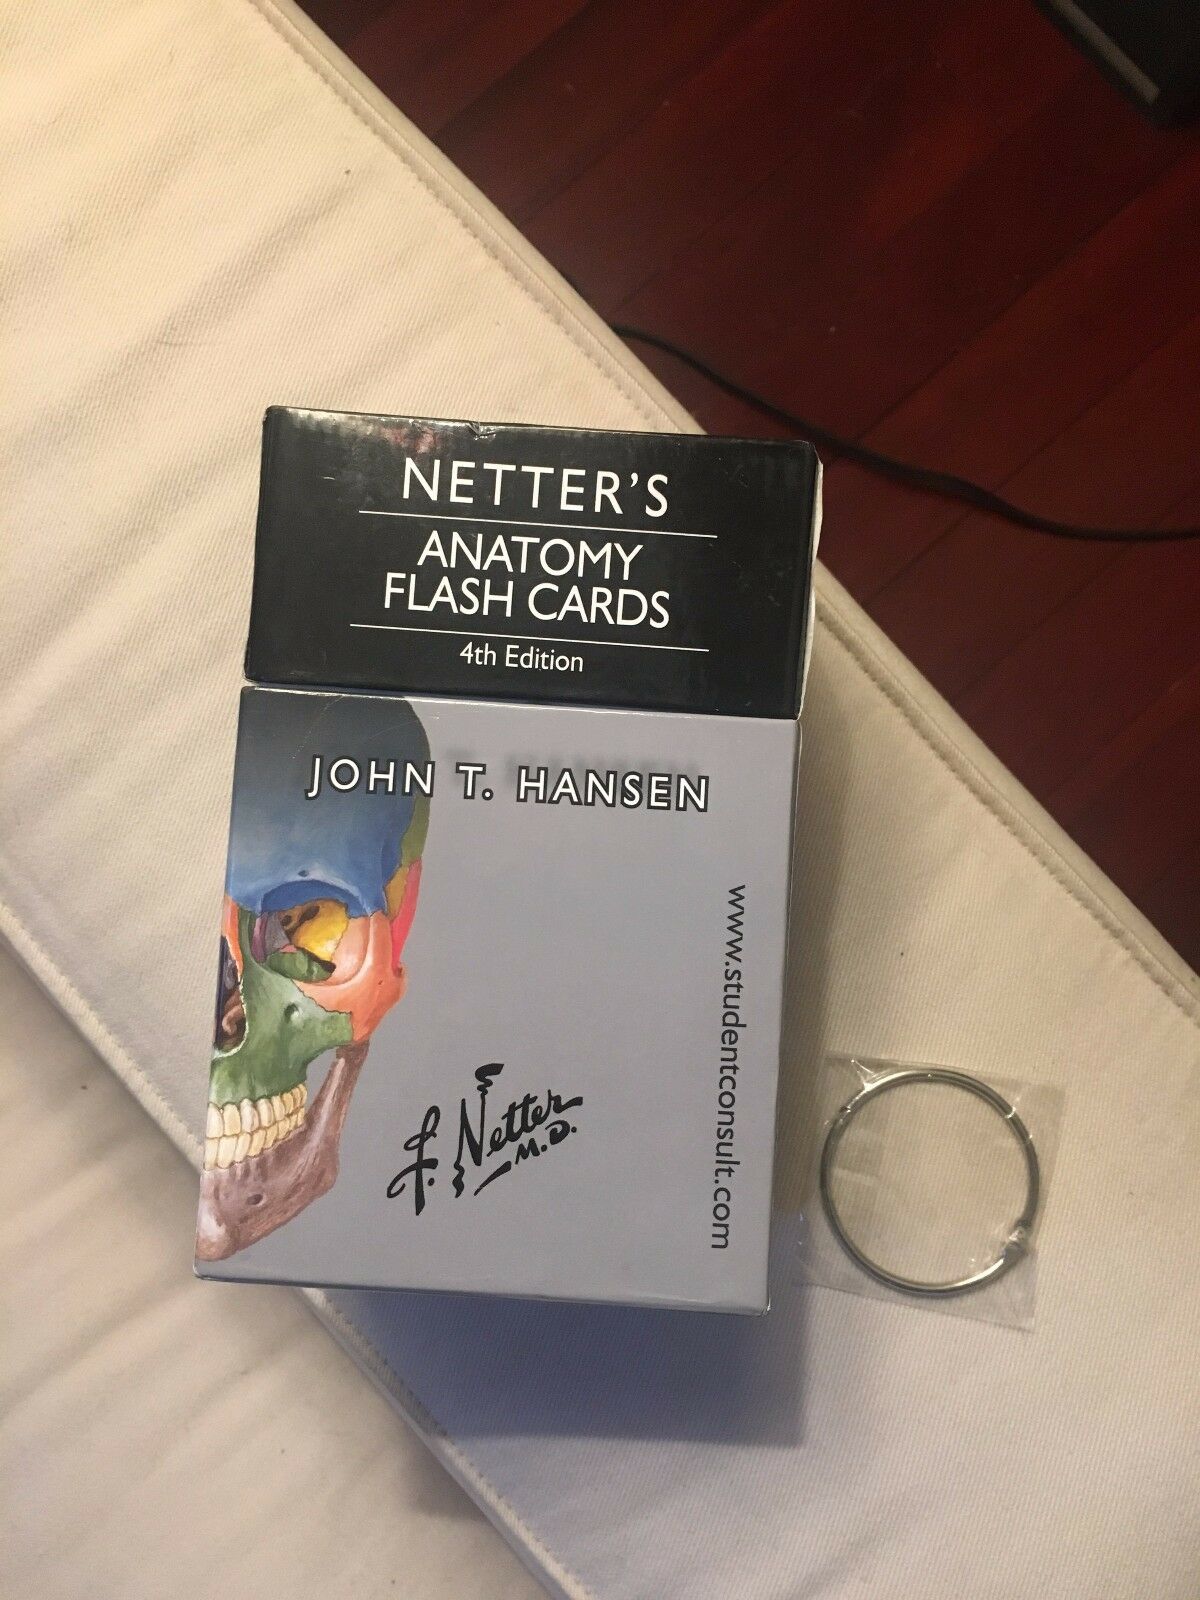 Netter's Anatomy Flash Cards 4th Edition